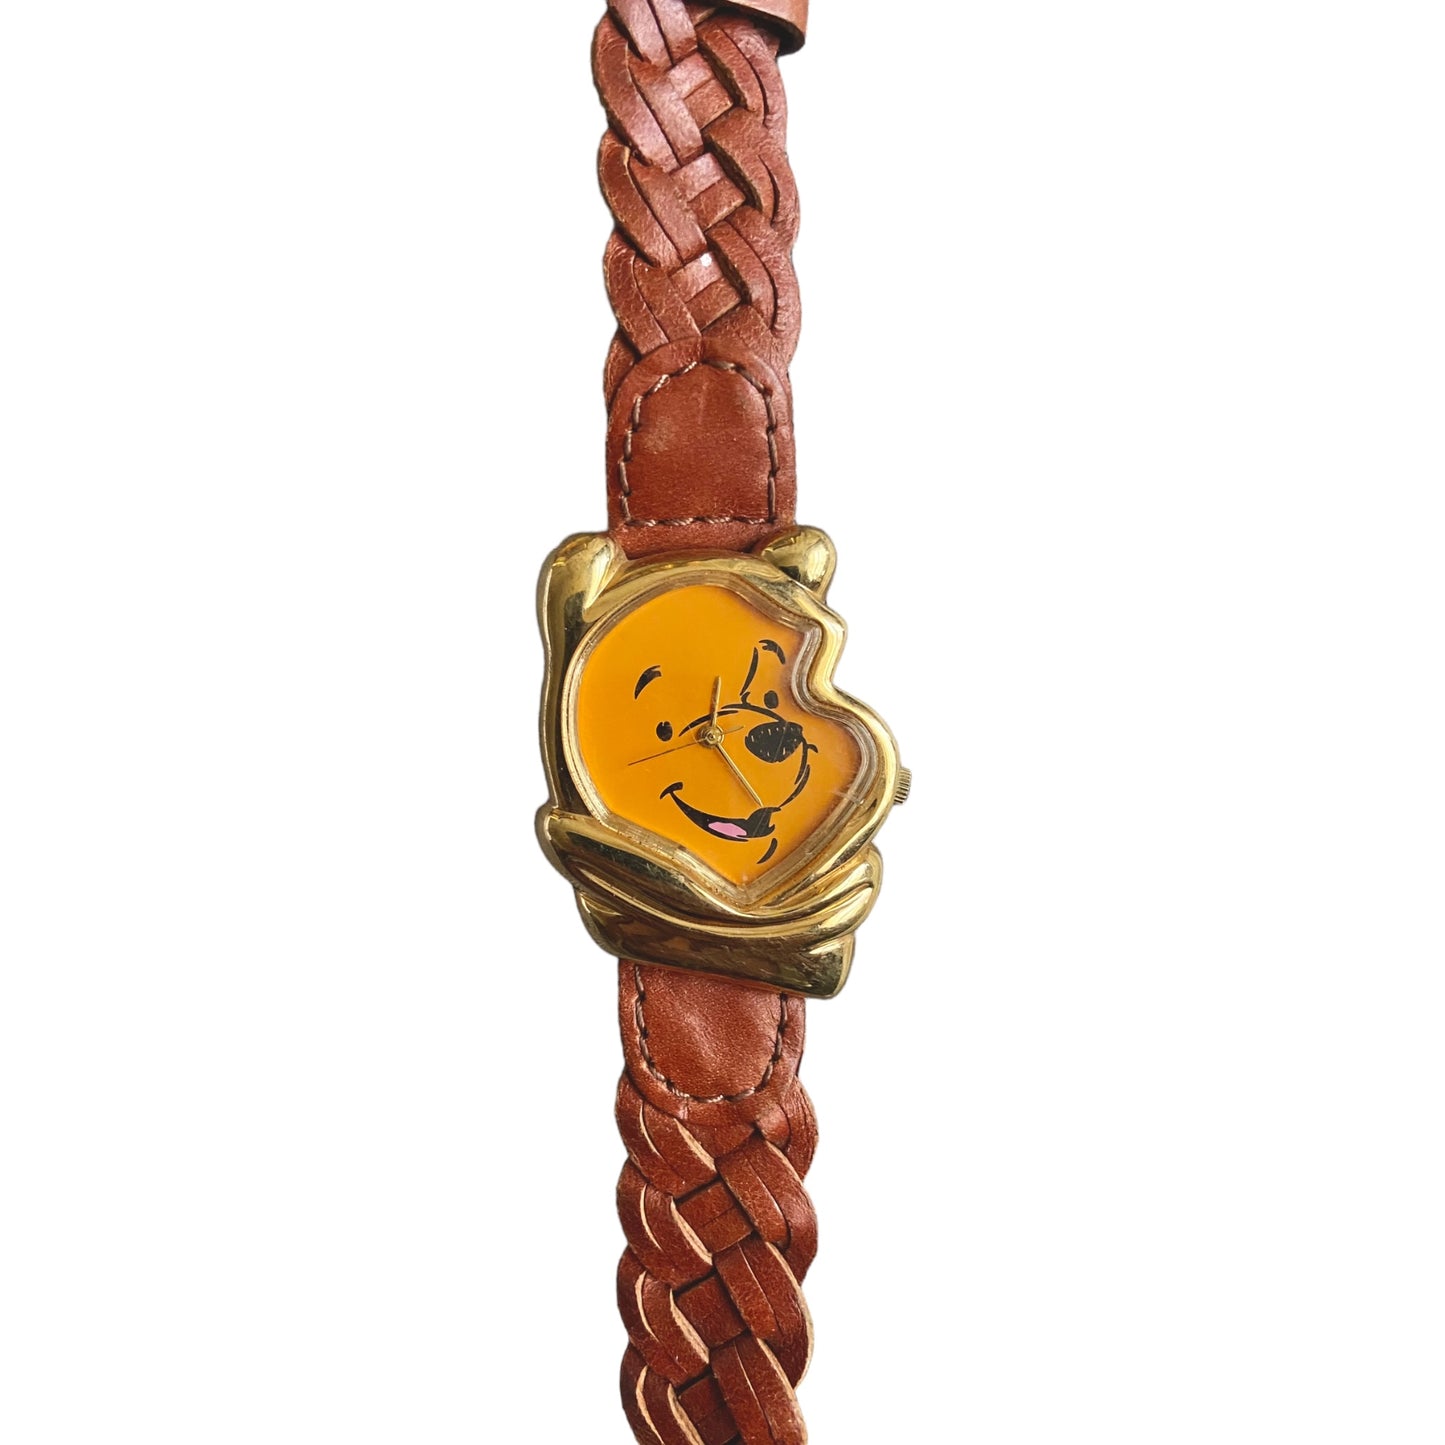 One-of-one | Pooh timex watch